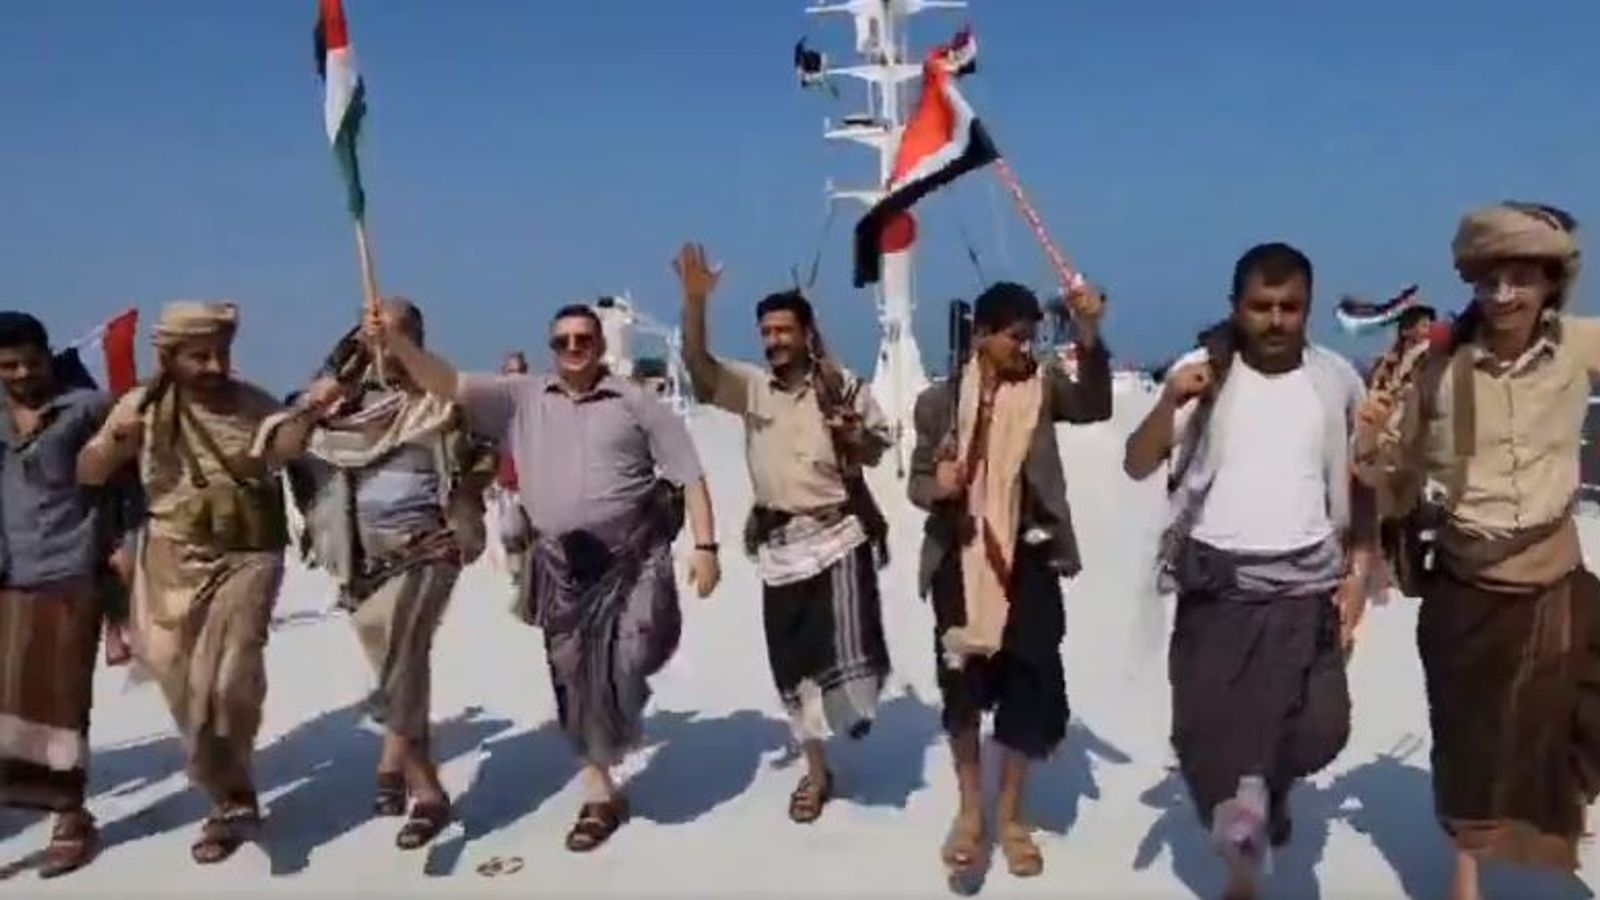 Yemeni social media influencers dance on Galaxy Leader cargo ship hijacked by Houthi rebels in Red Sea